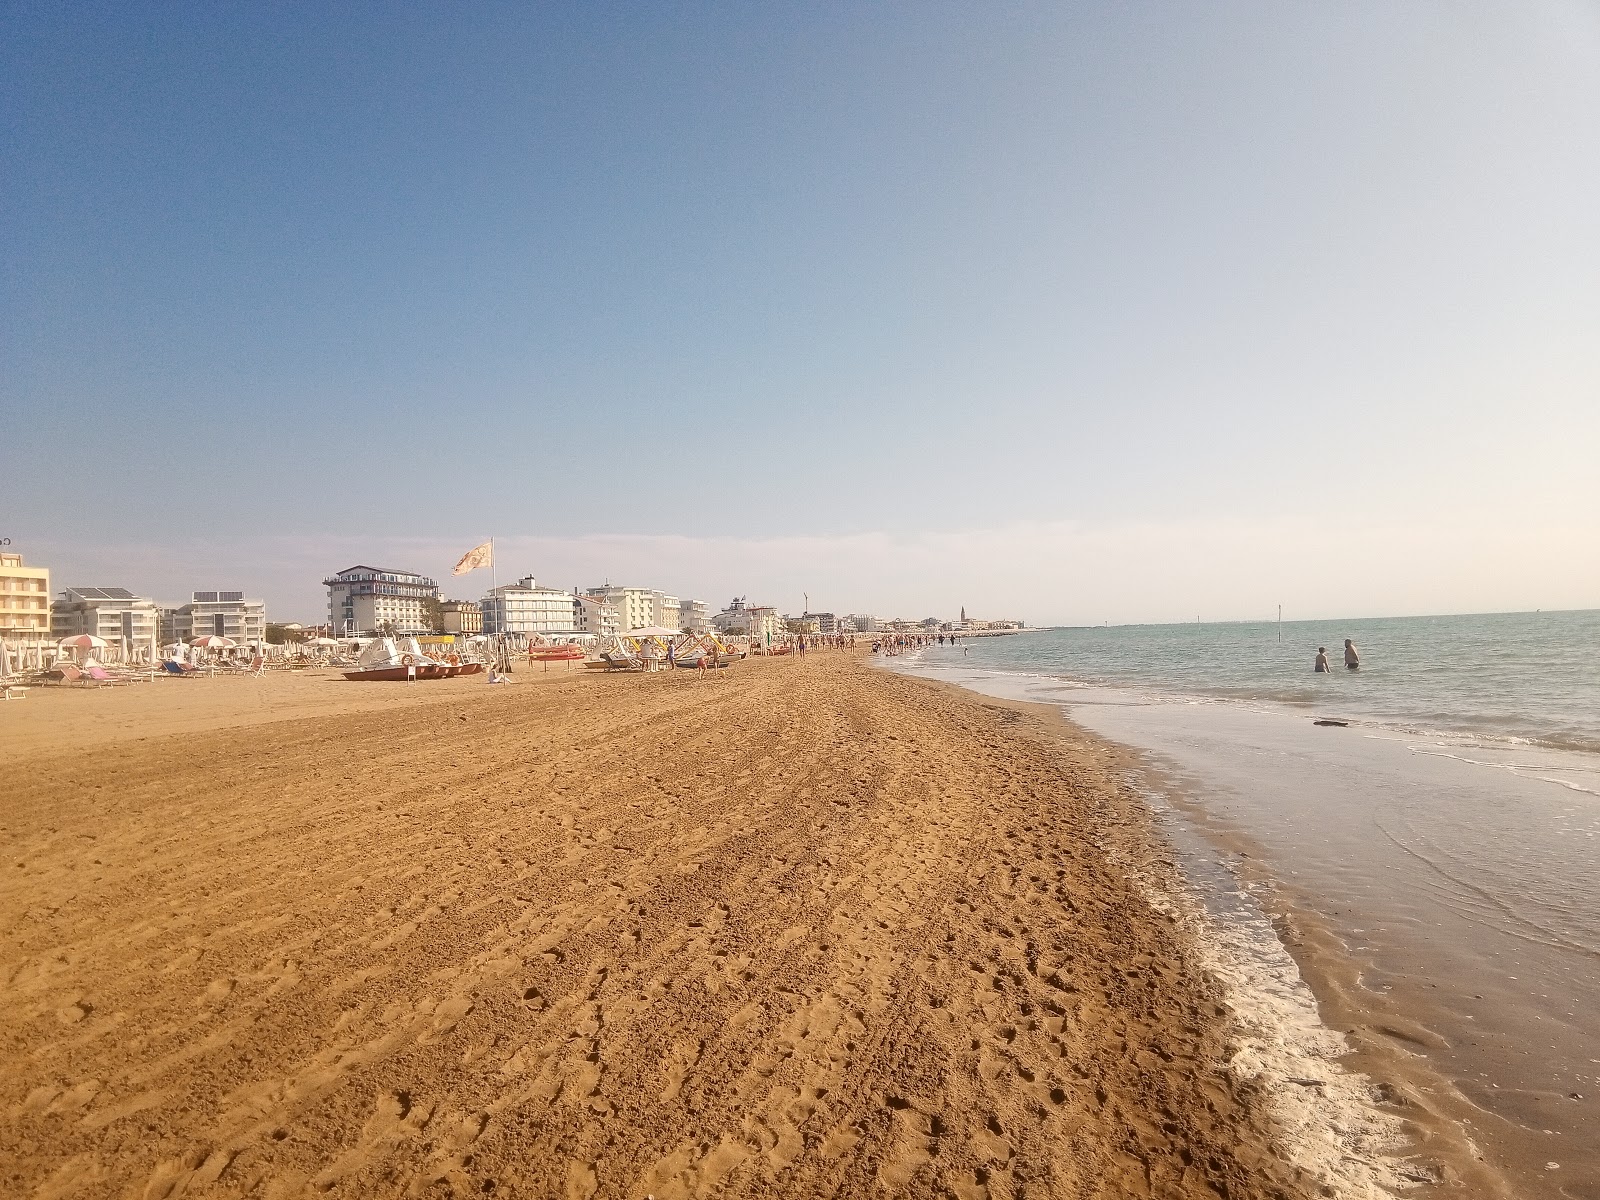 Photo of Caorle beach with long straight shore